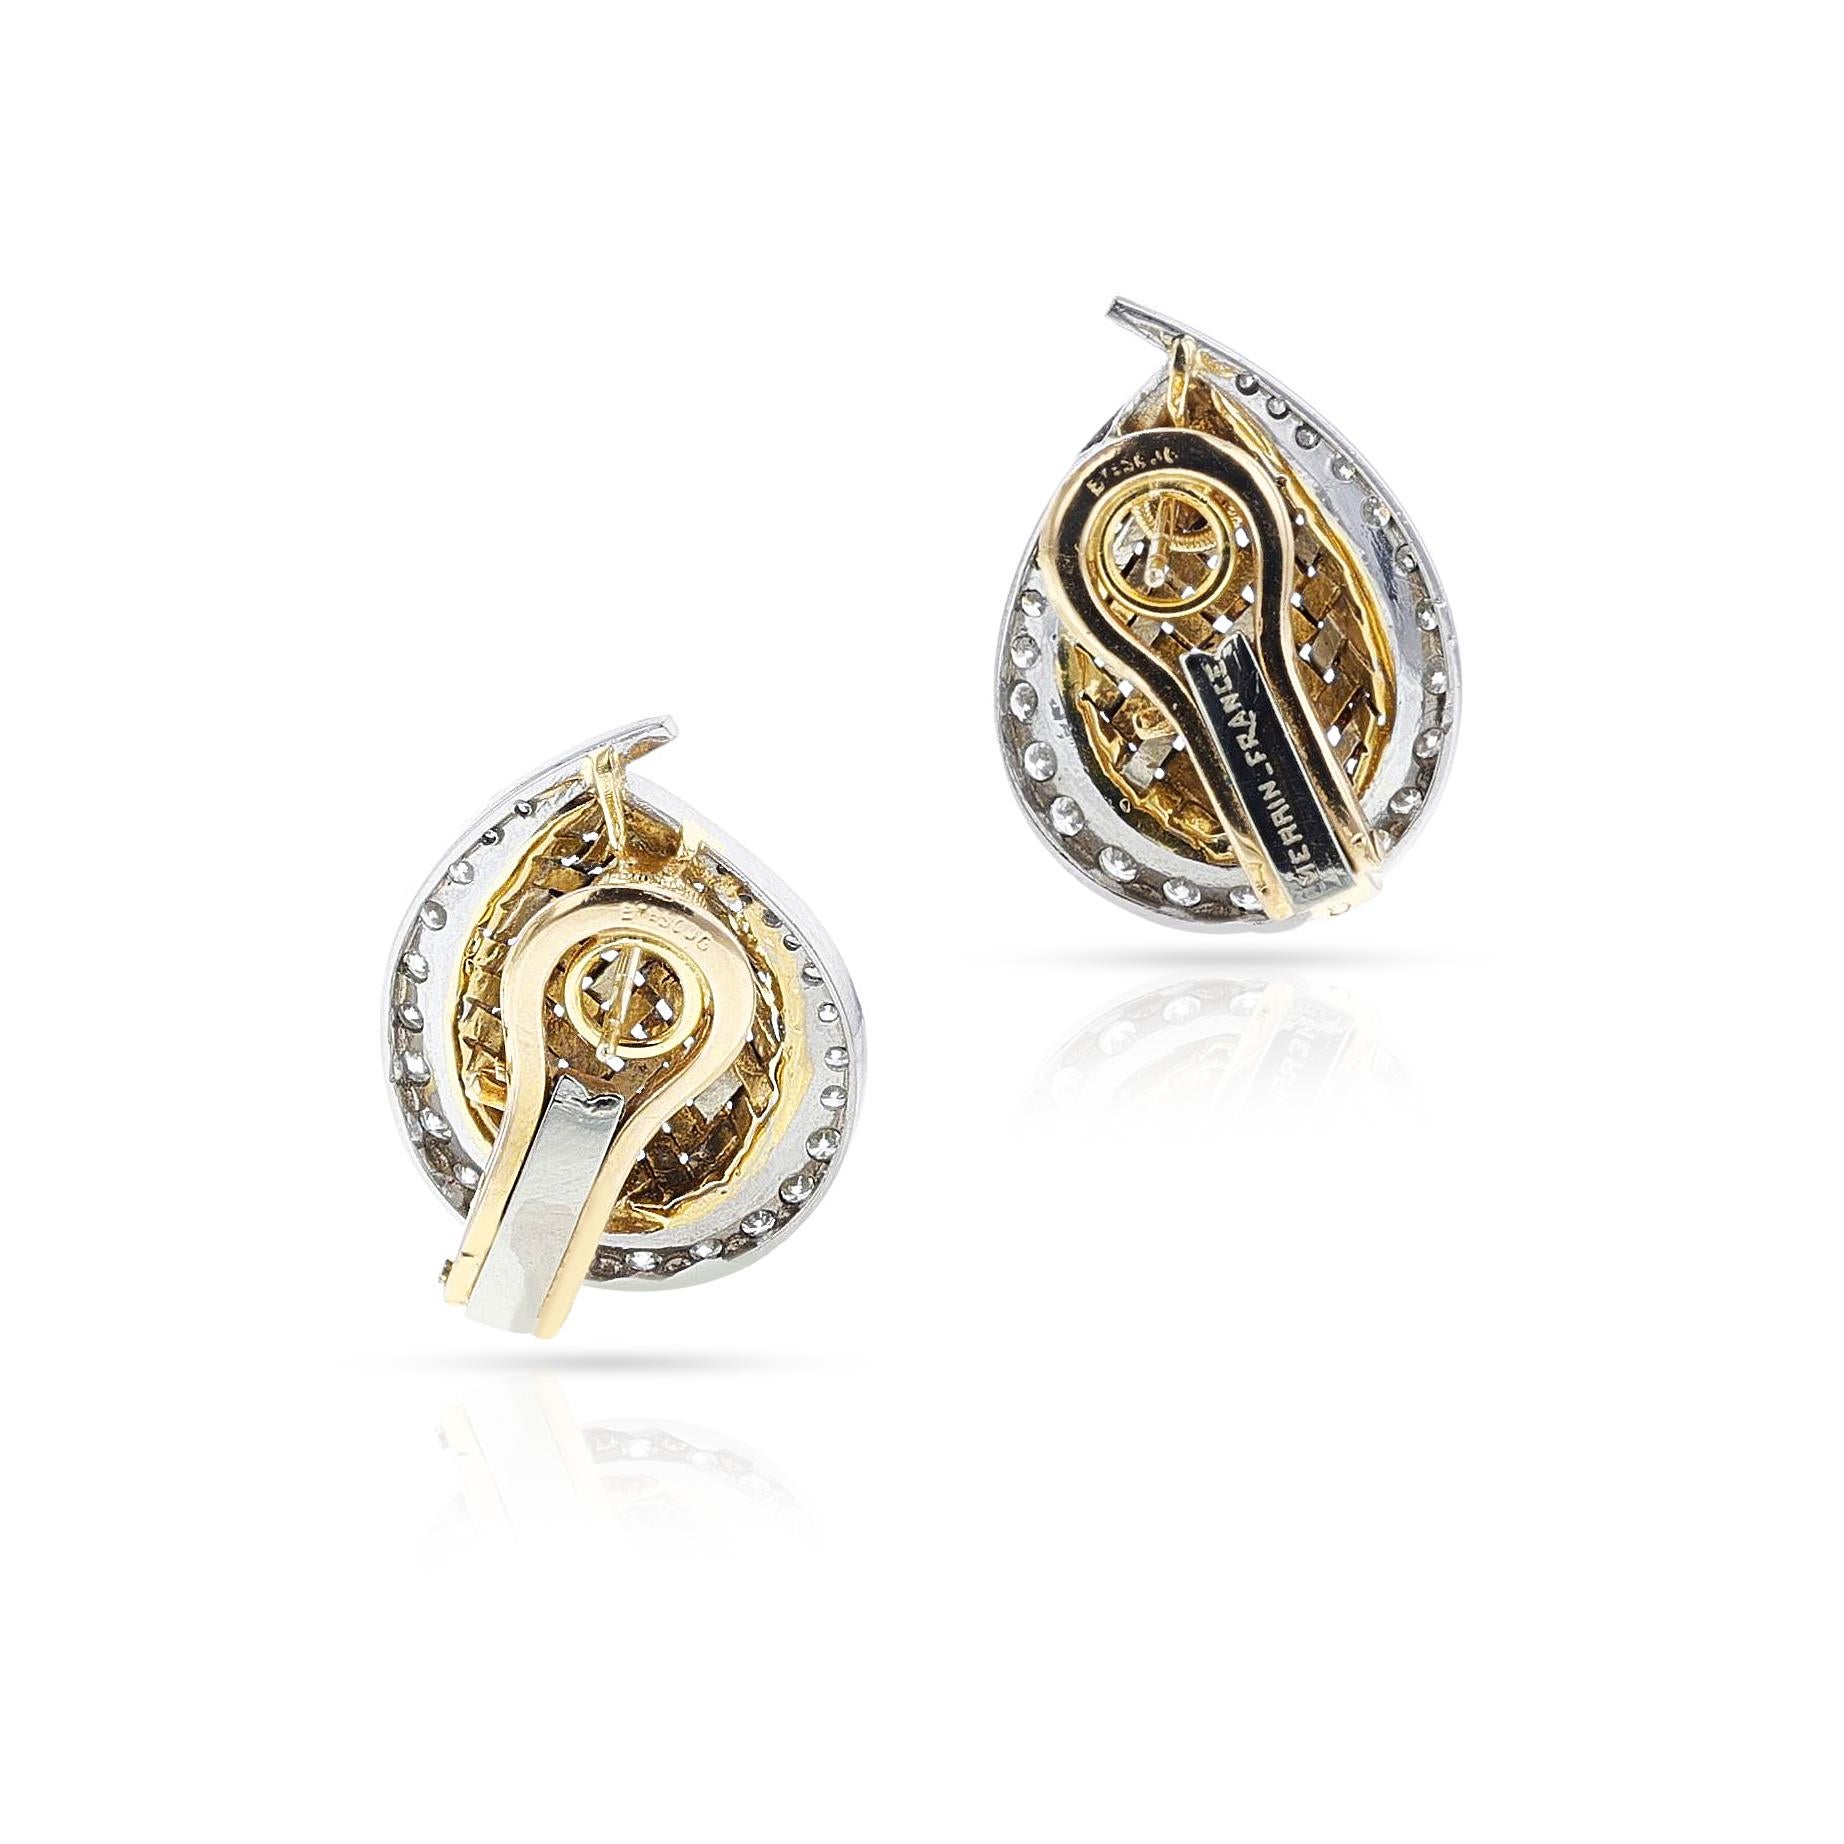 Merrin France Diamond and Textured Gold Leaf Earrings, 18k In Excellent Condition For Sale In New York, NY